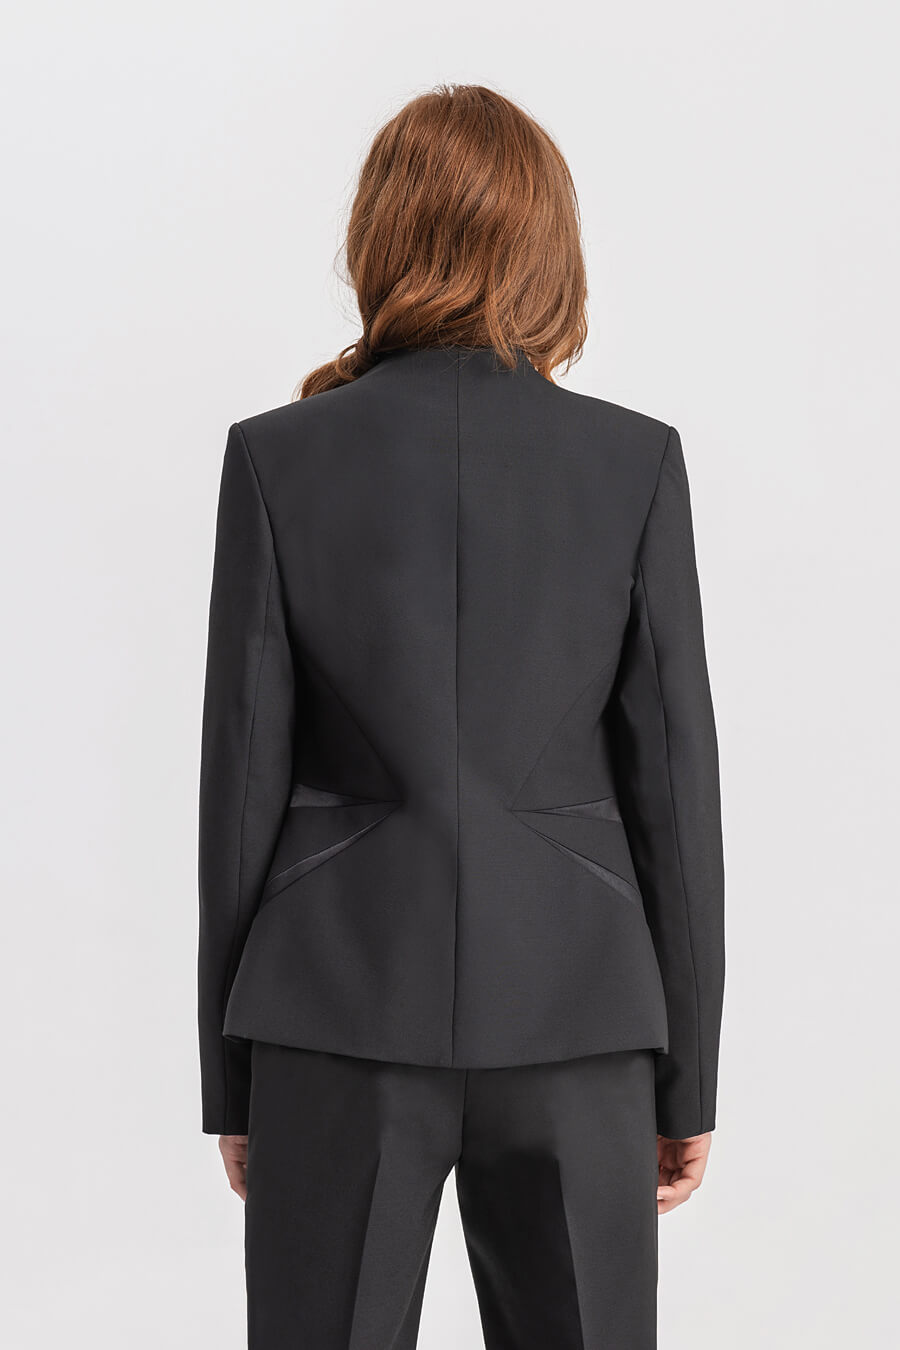 Tuxedo jacket with satin inserts and structural cuts in black | D2line